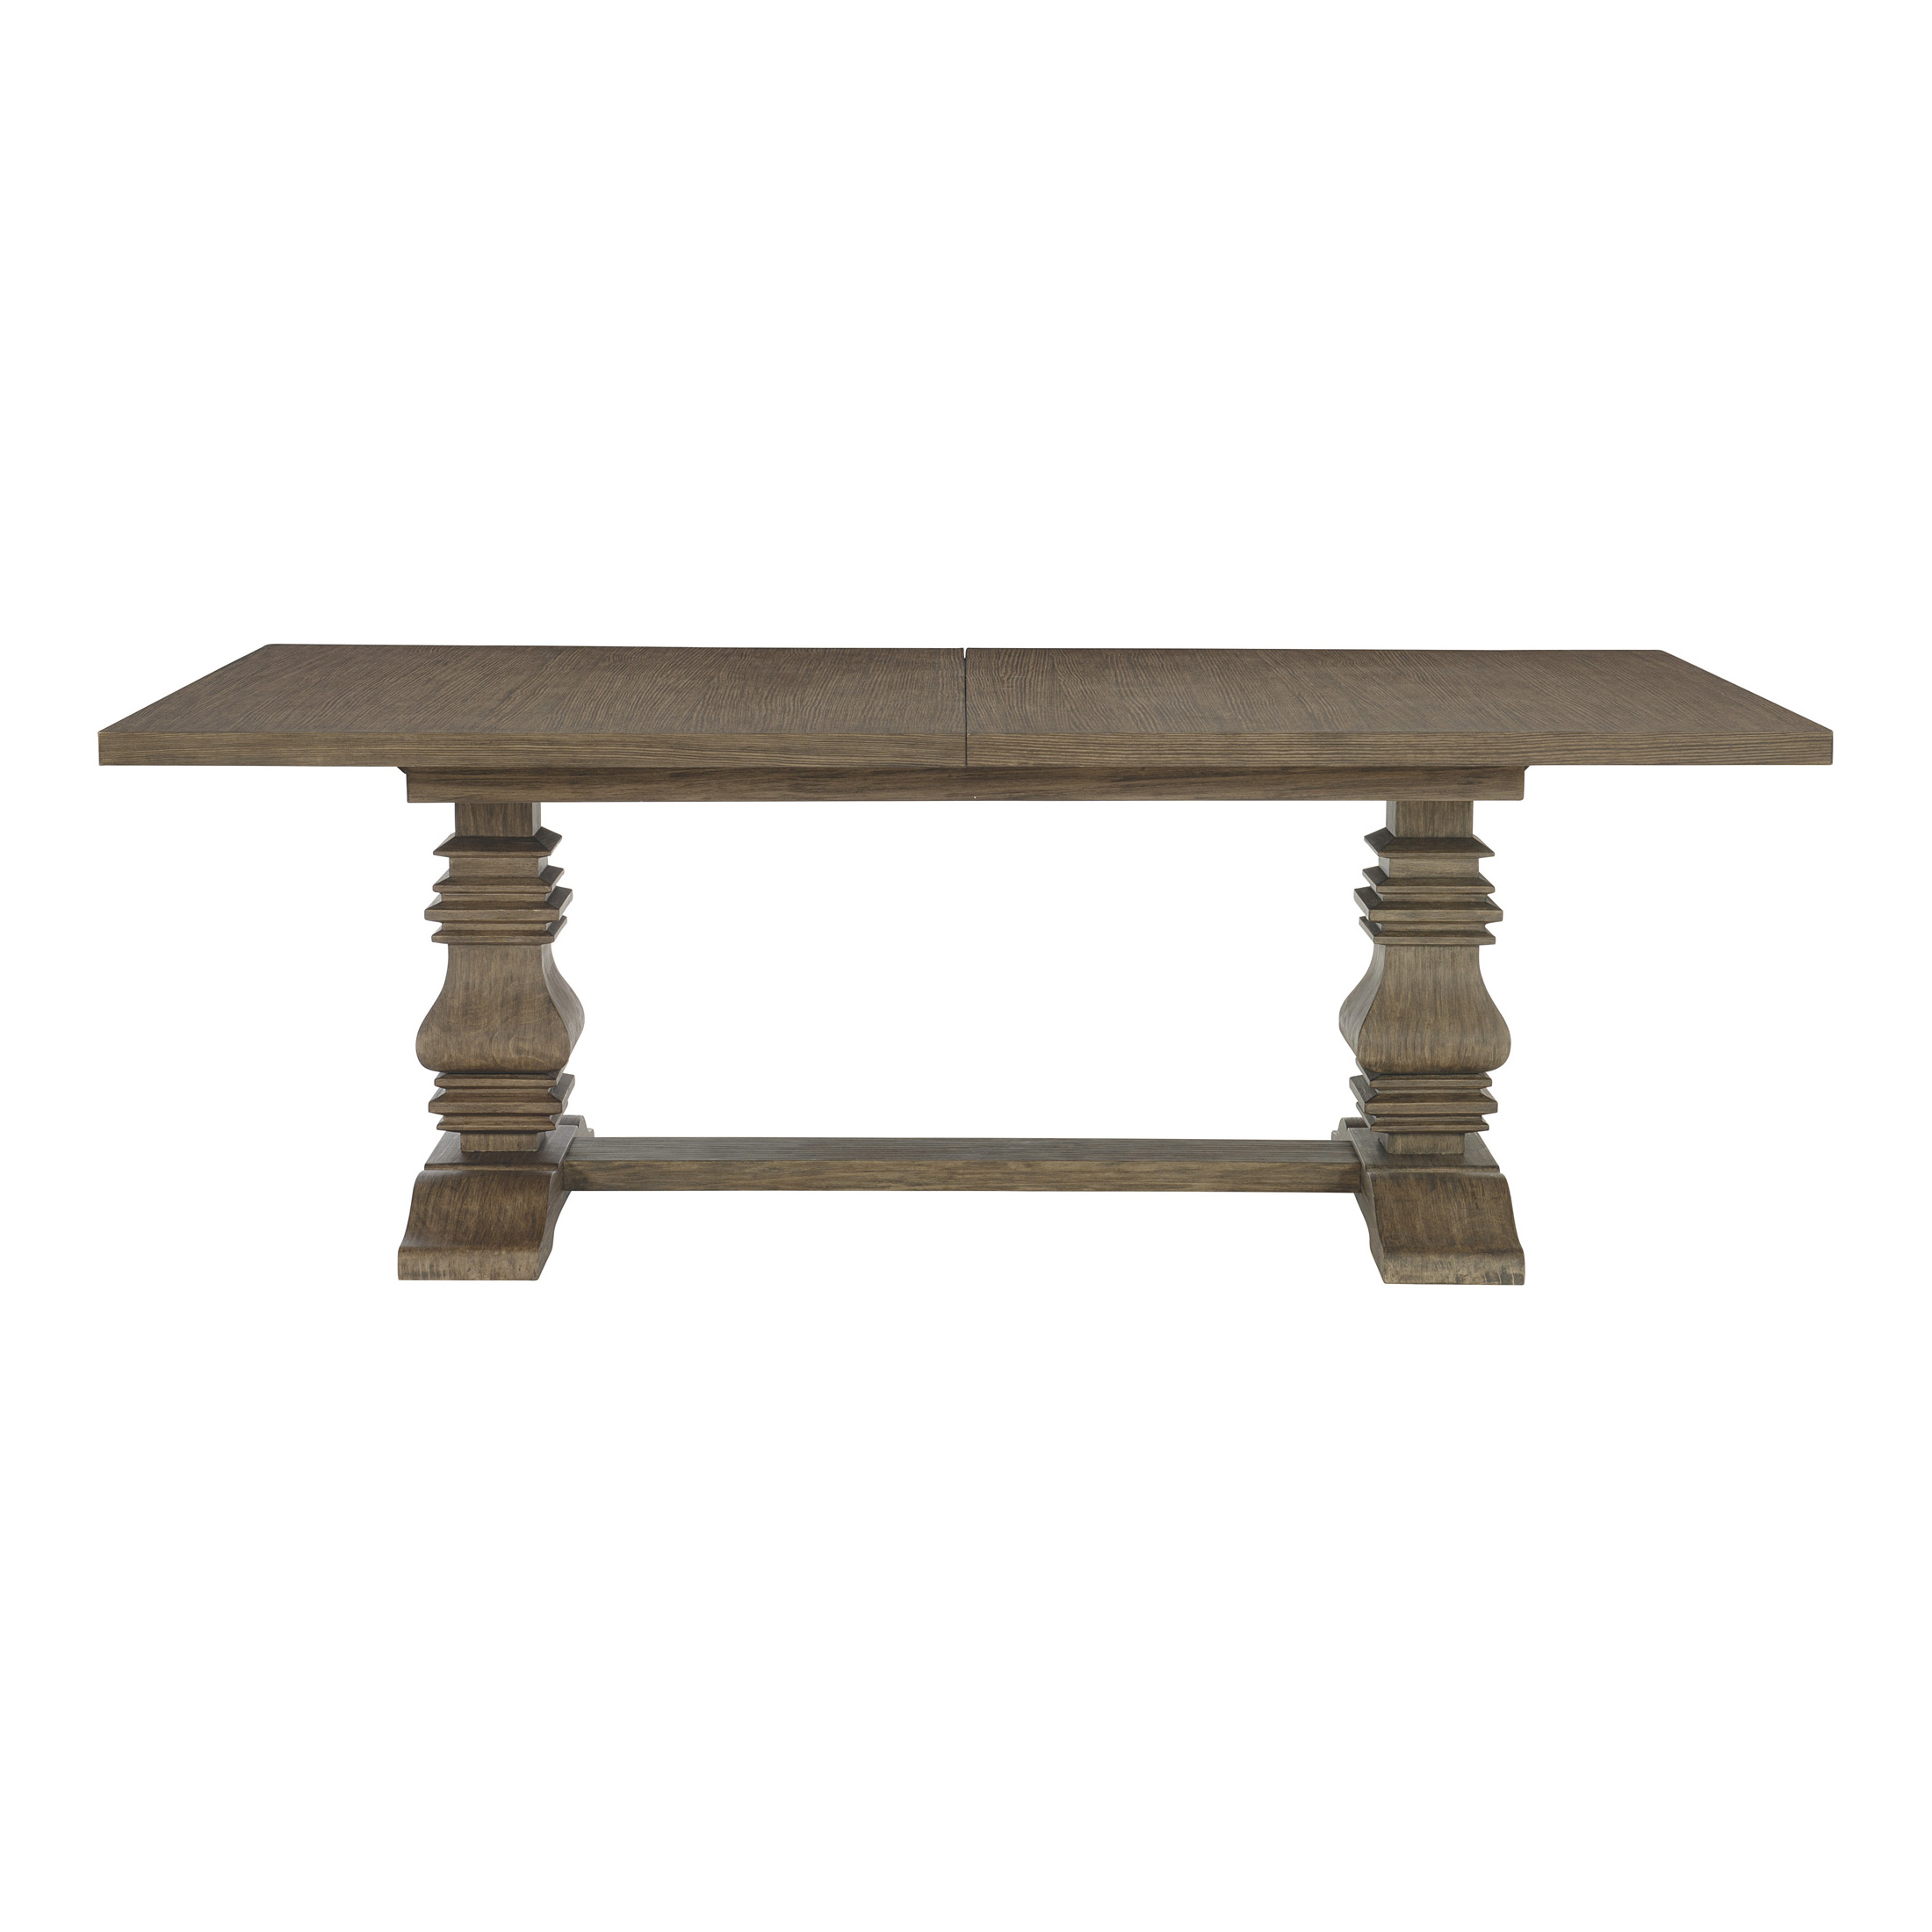 Canyon Ridge Pedestal Dining Table in Desert Taupe by Bernhardt